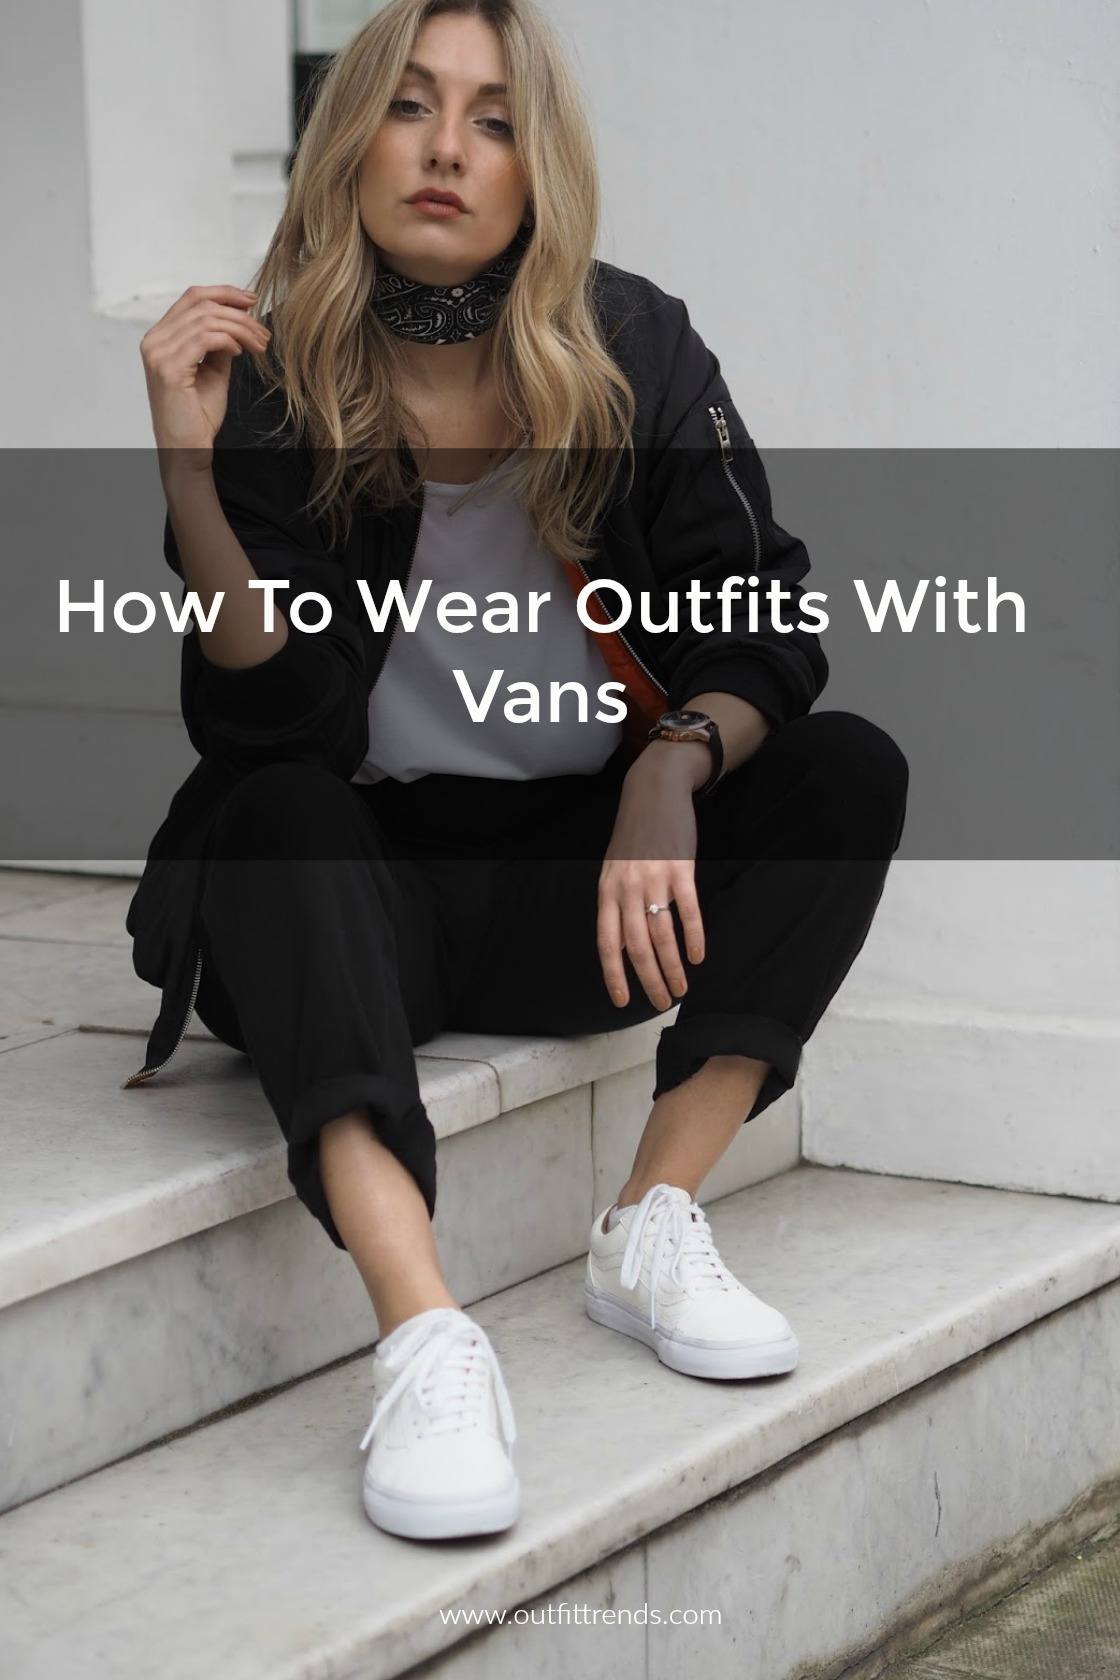 Descubrir mundo prefacio Women's Outfits with Vans-30 Outfits to Wear with Vans Shoes